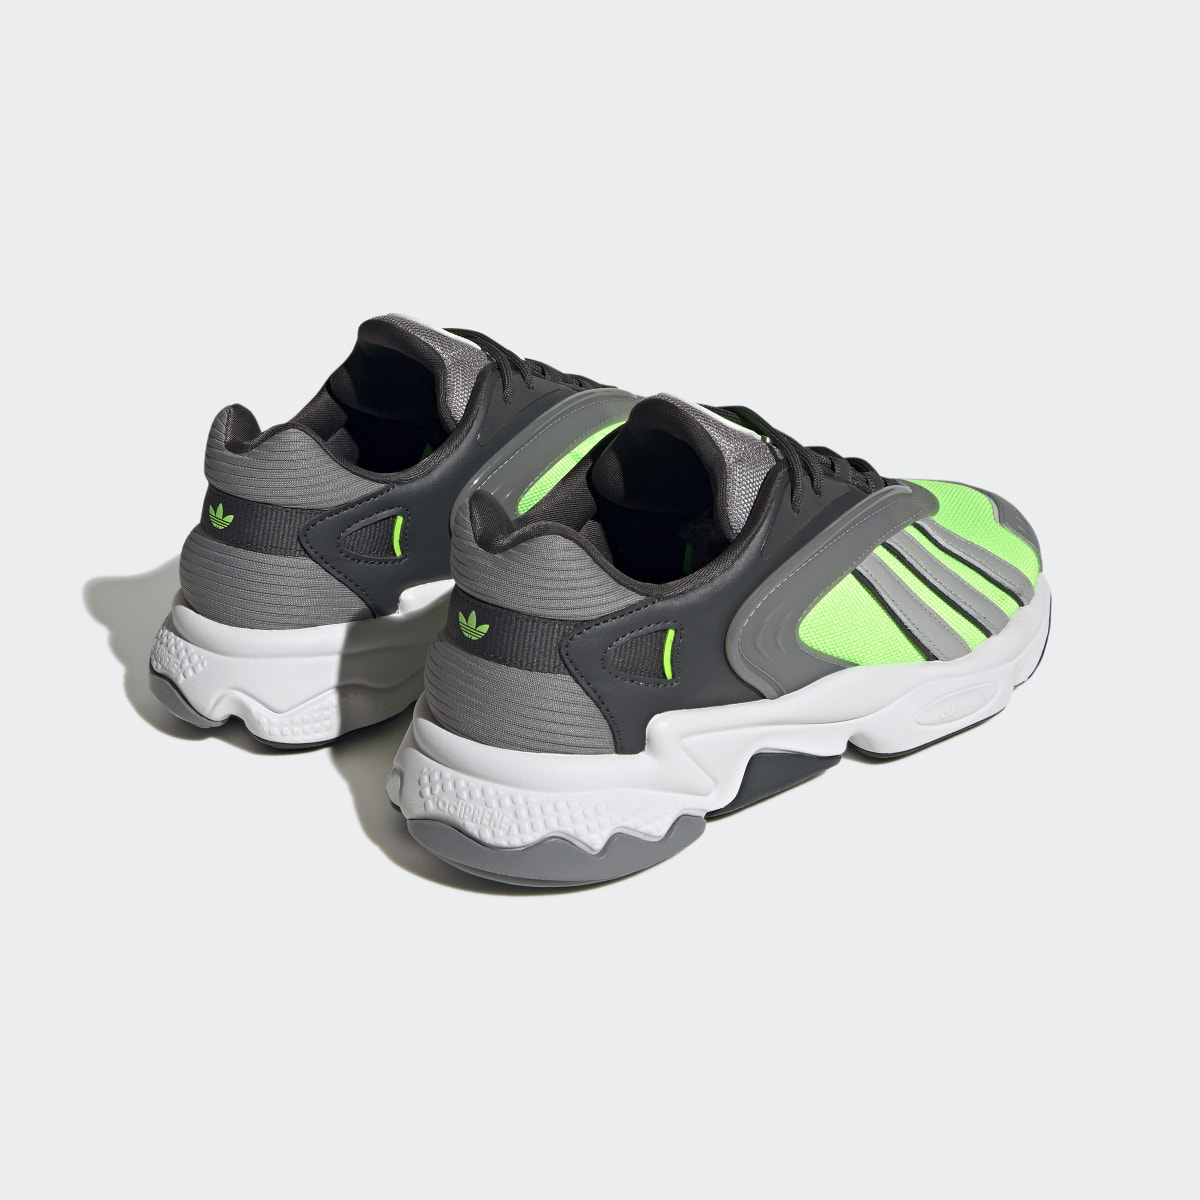 Adidas Oztral Shoes. 6